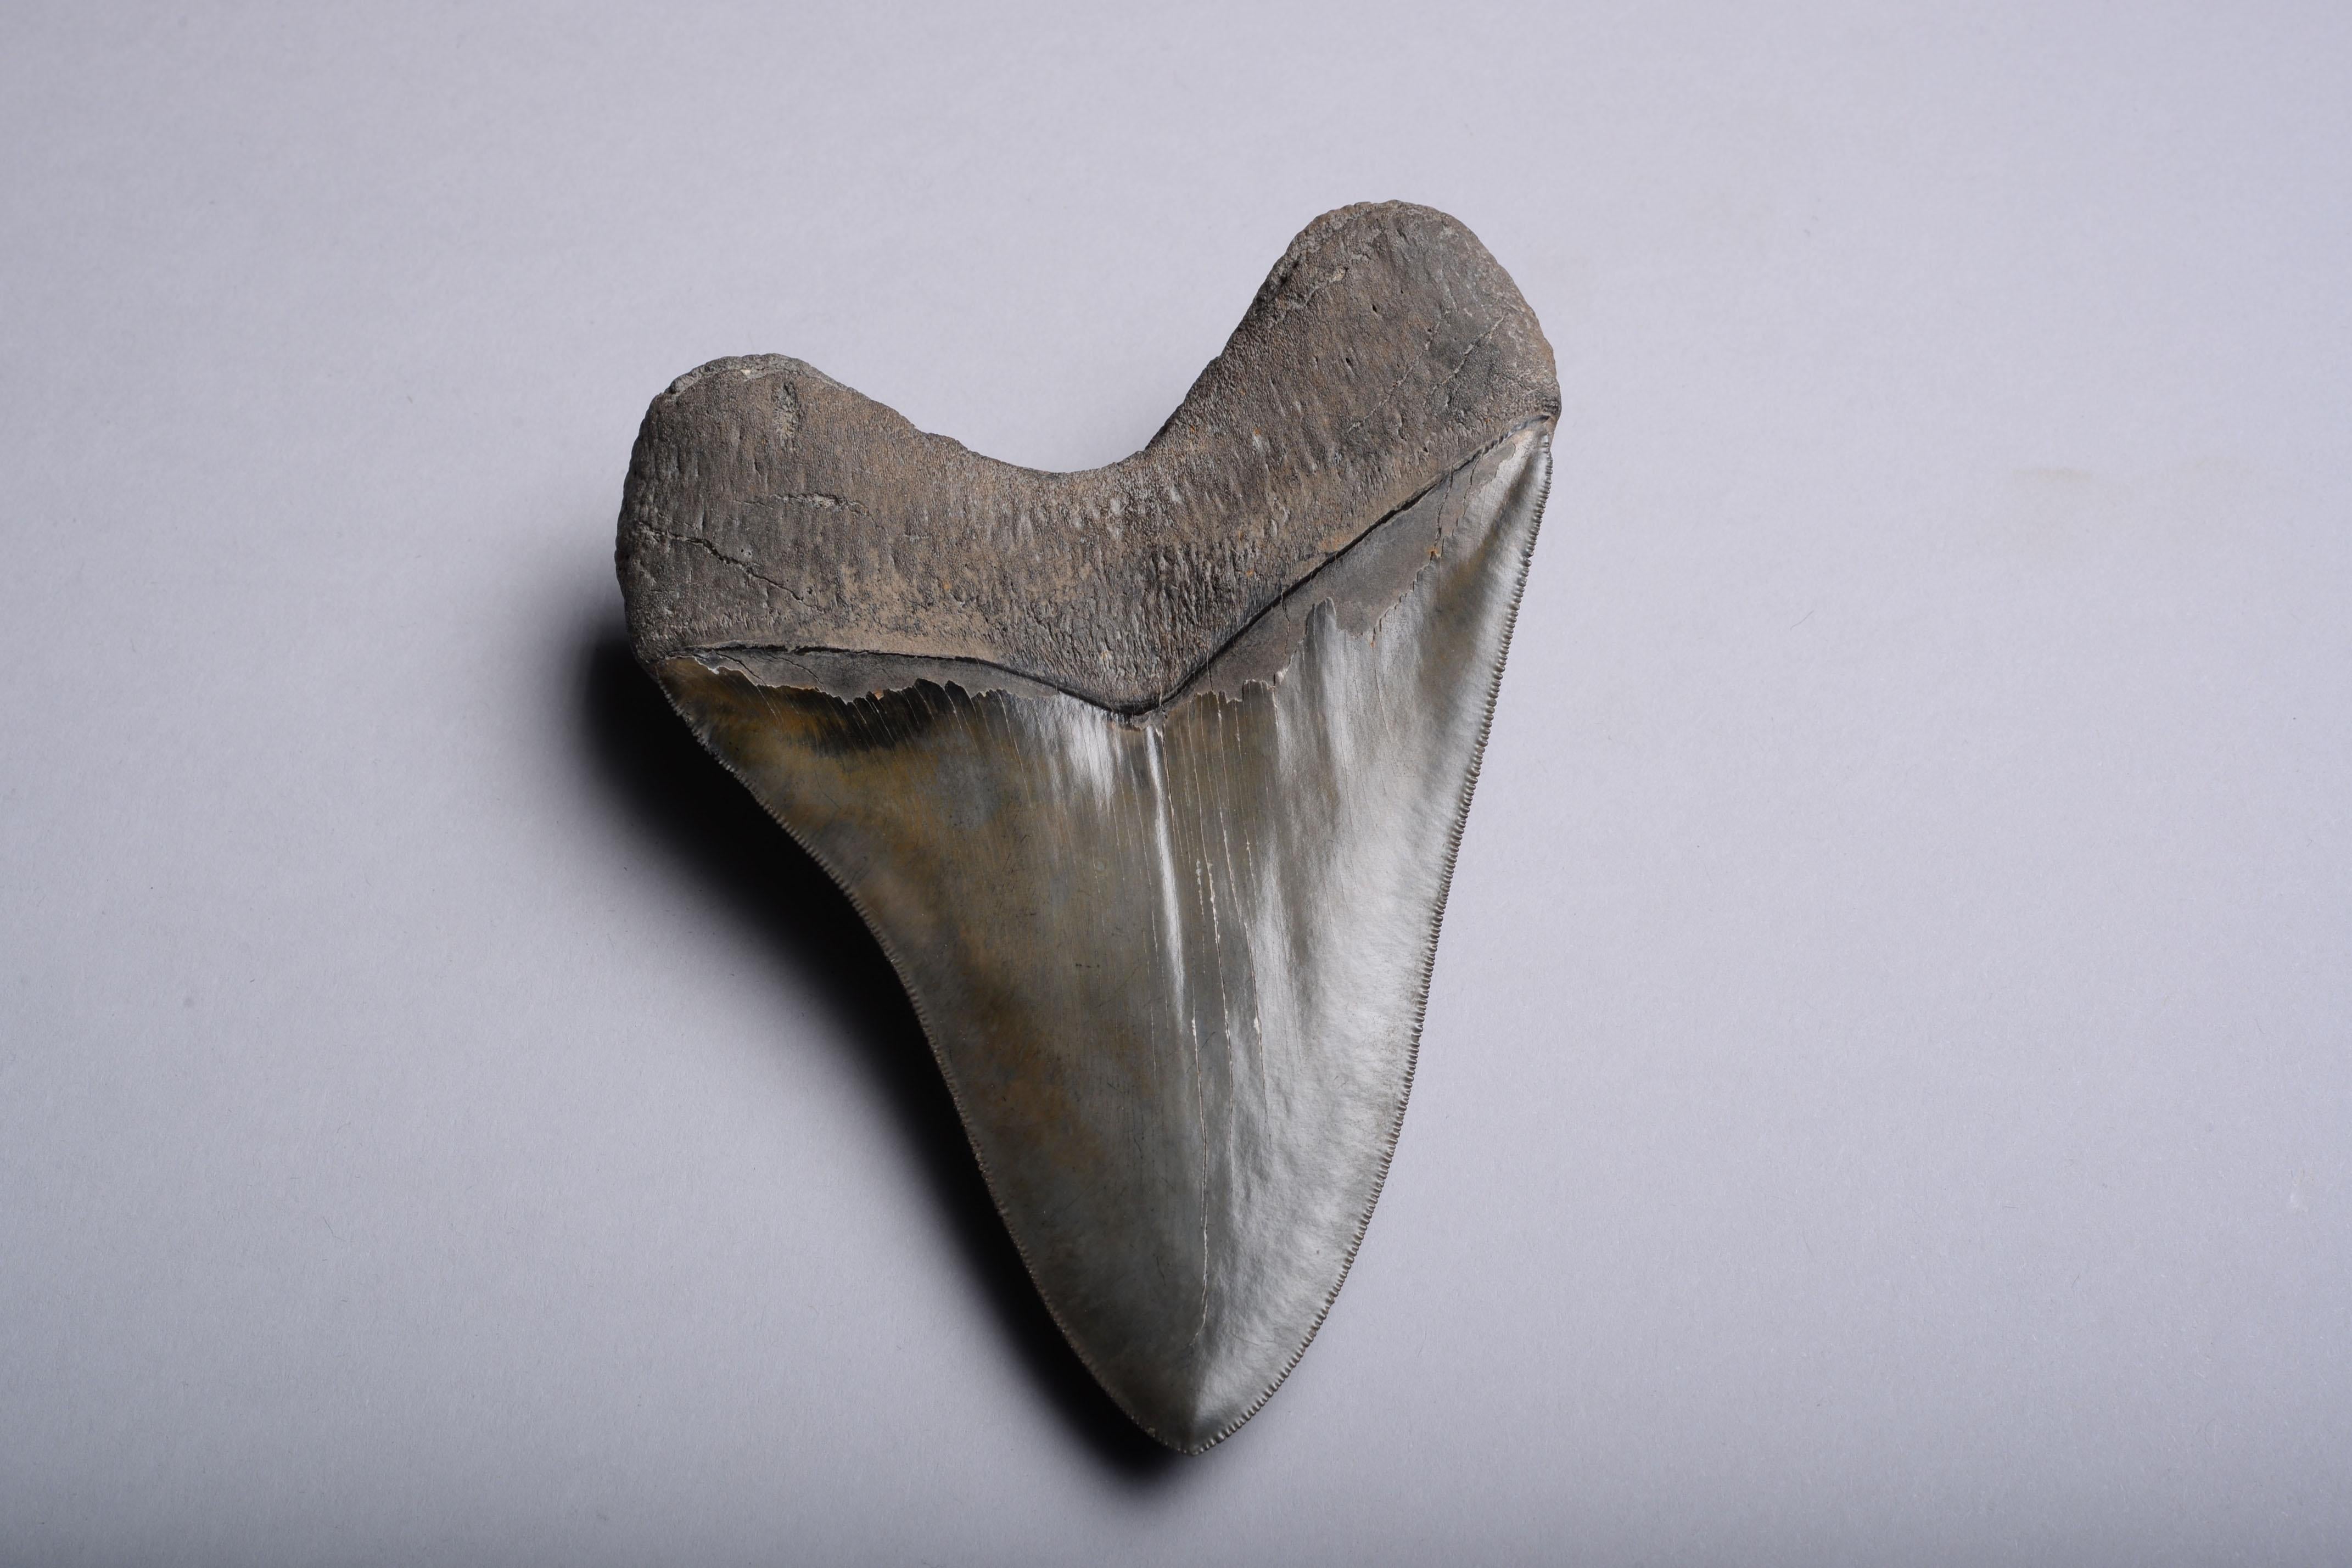 A huge, perfectly preserved Megalodon (Carcharocles megalodon) shark tooth, dating to 25 – 2 million years before the present day.

It's hard to comprehend that this enormous serrated tooth once belonged to a living creature. Yet this beautiful